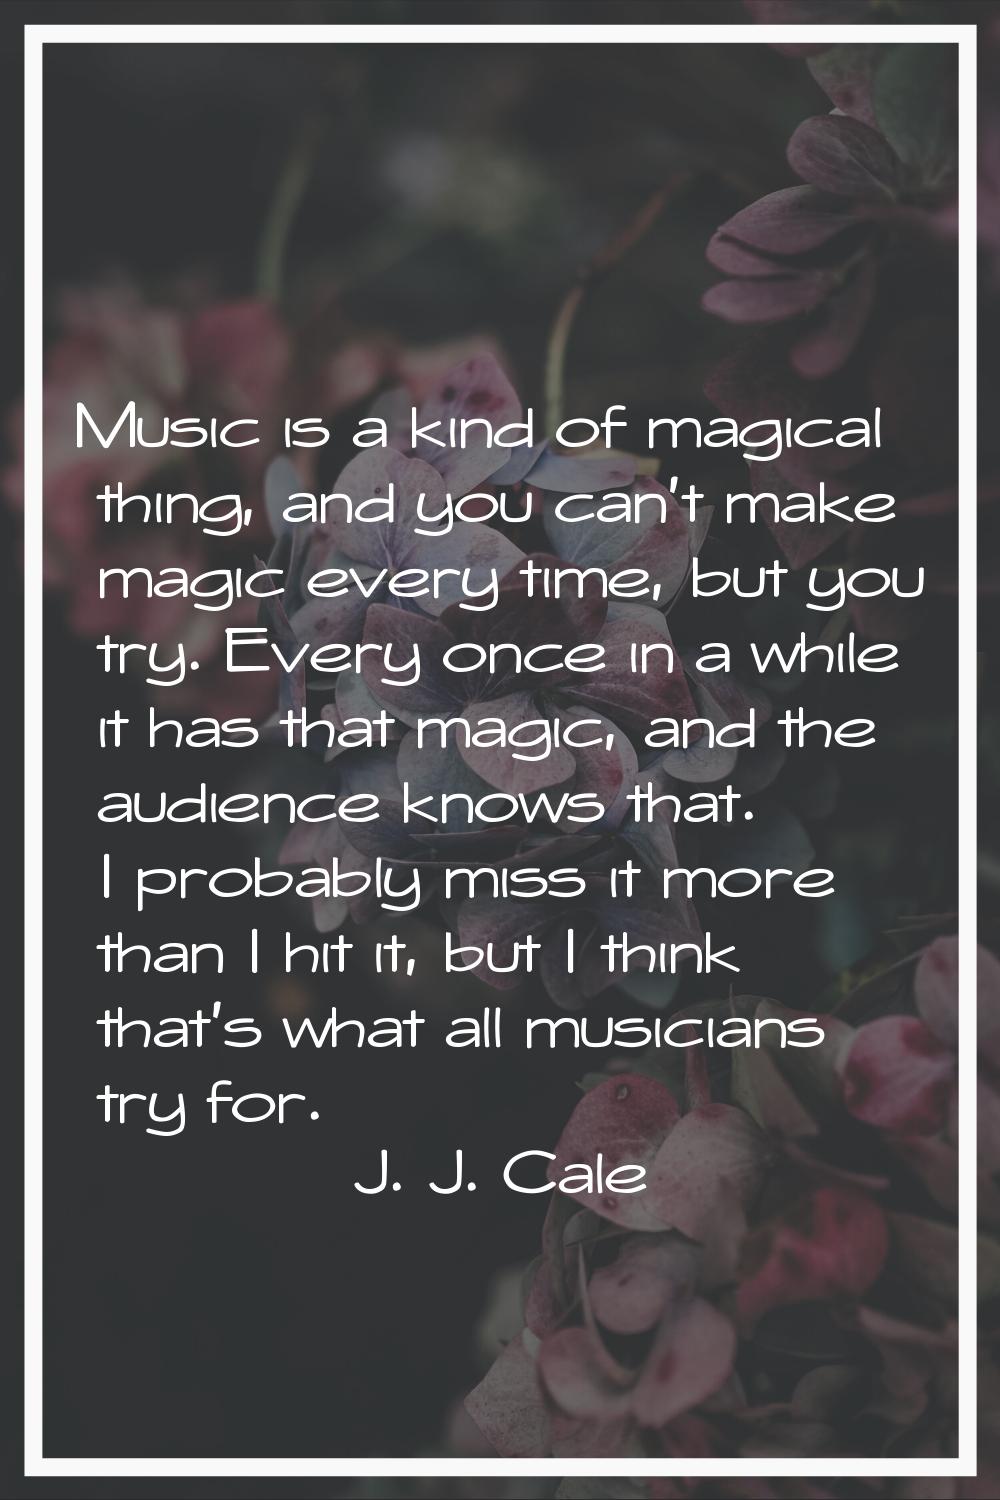 Music is a kind of magical thing, and you can't make magic every time, but you try. Every once in a